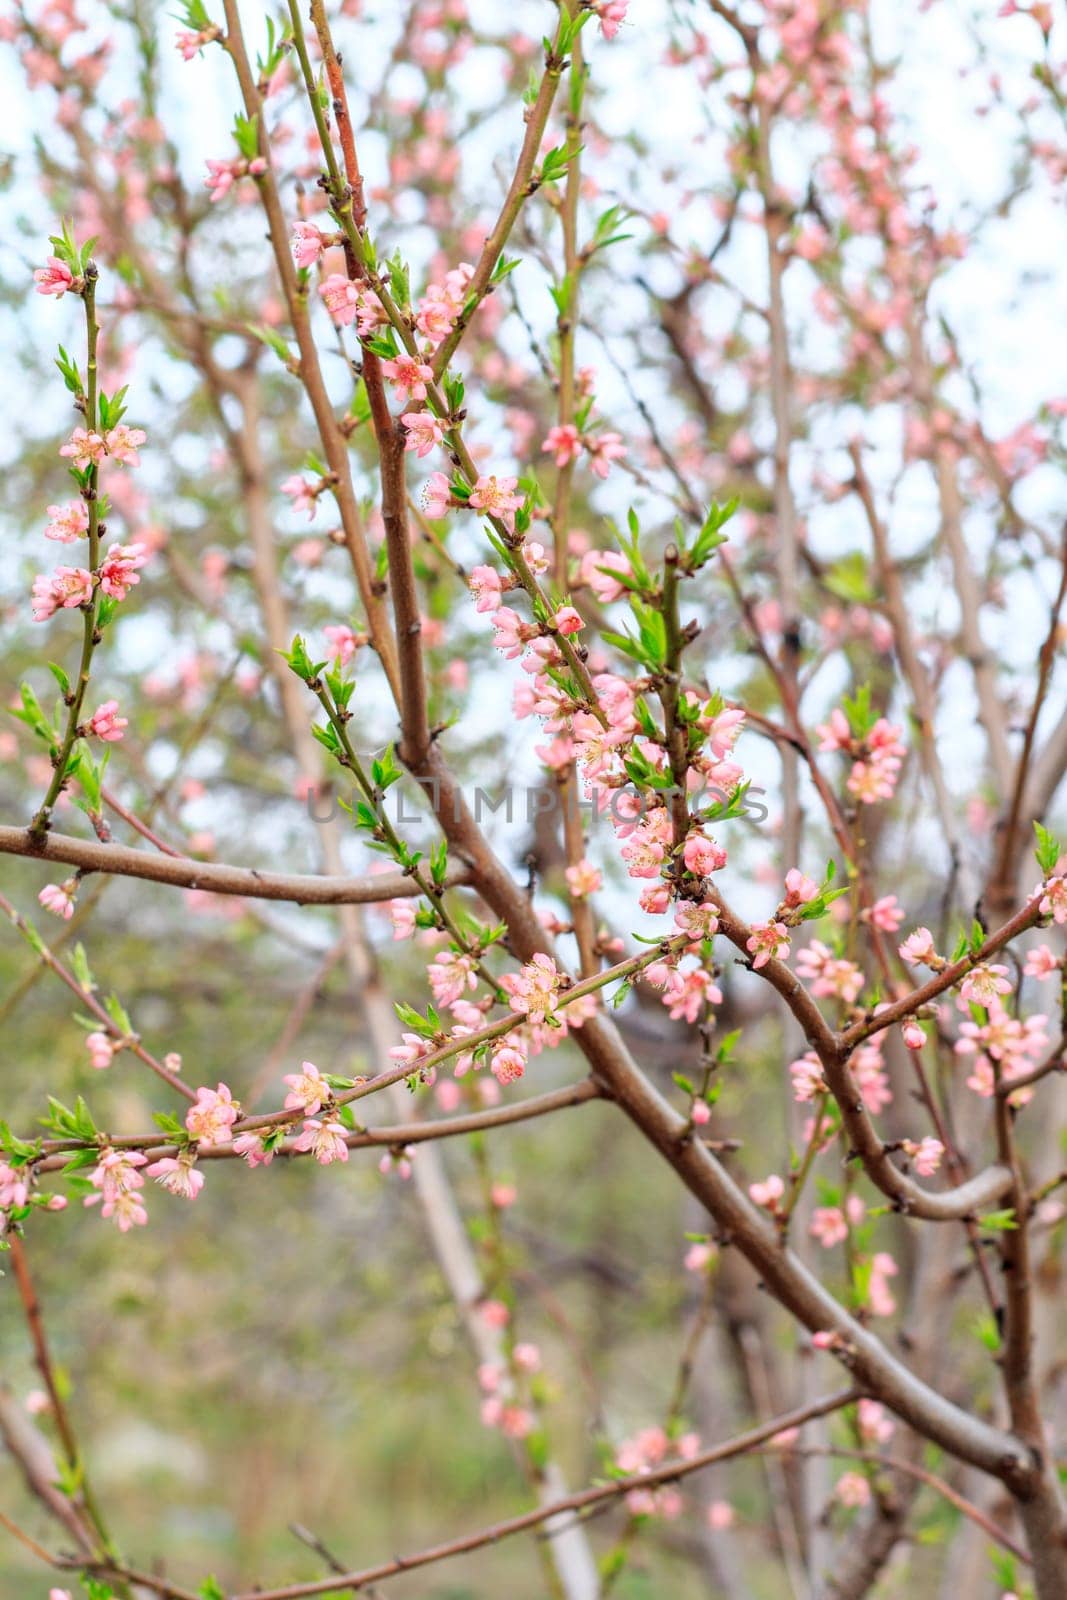 Branches of peach tree in the period of spring flowering. by mvg6894